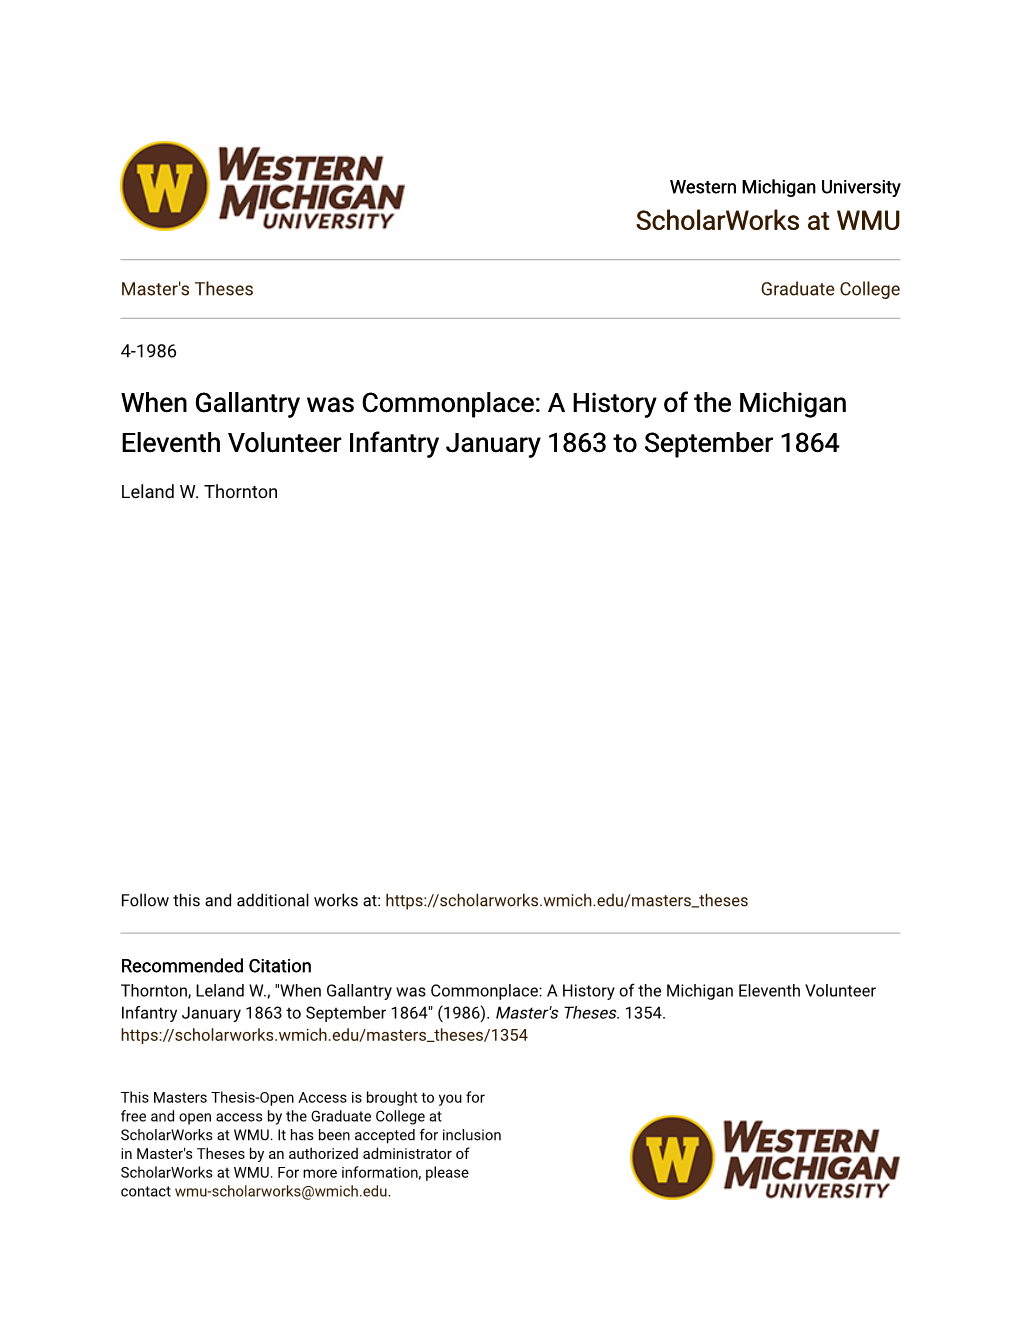 A History of the Michigan Eleventh Volunteer Infantry January 1863 to September 1864